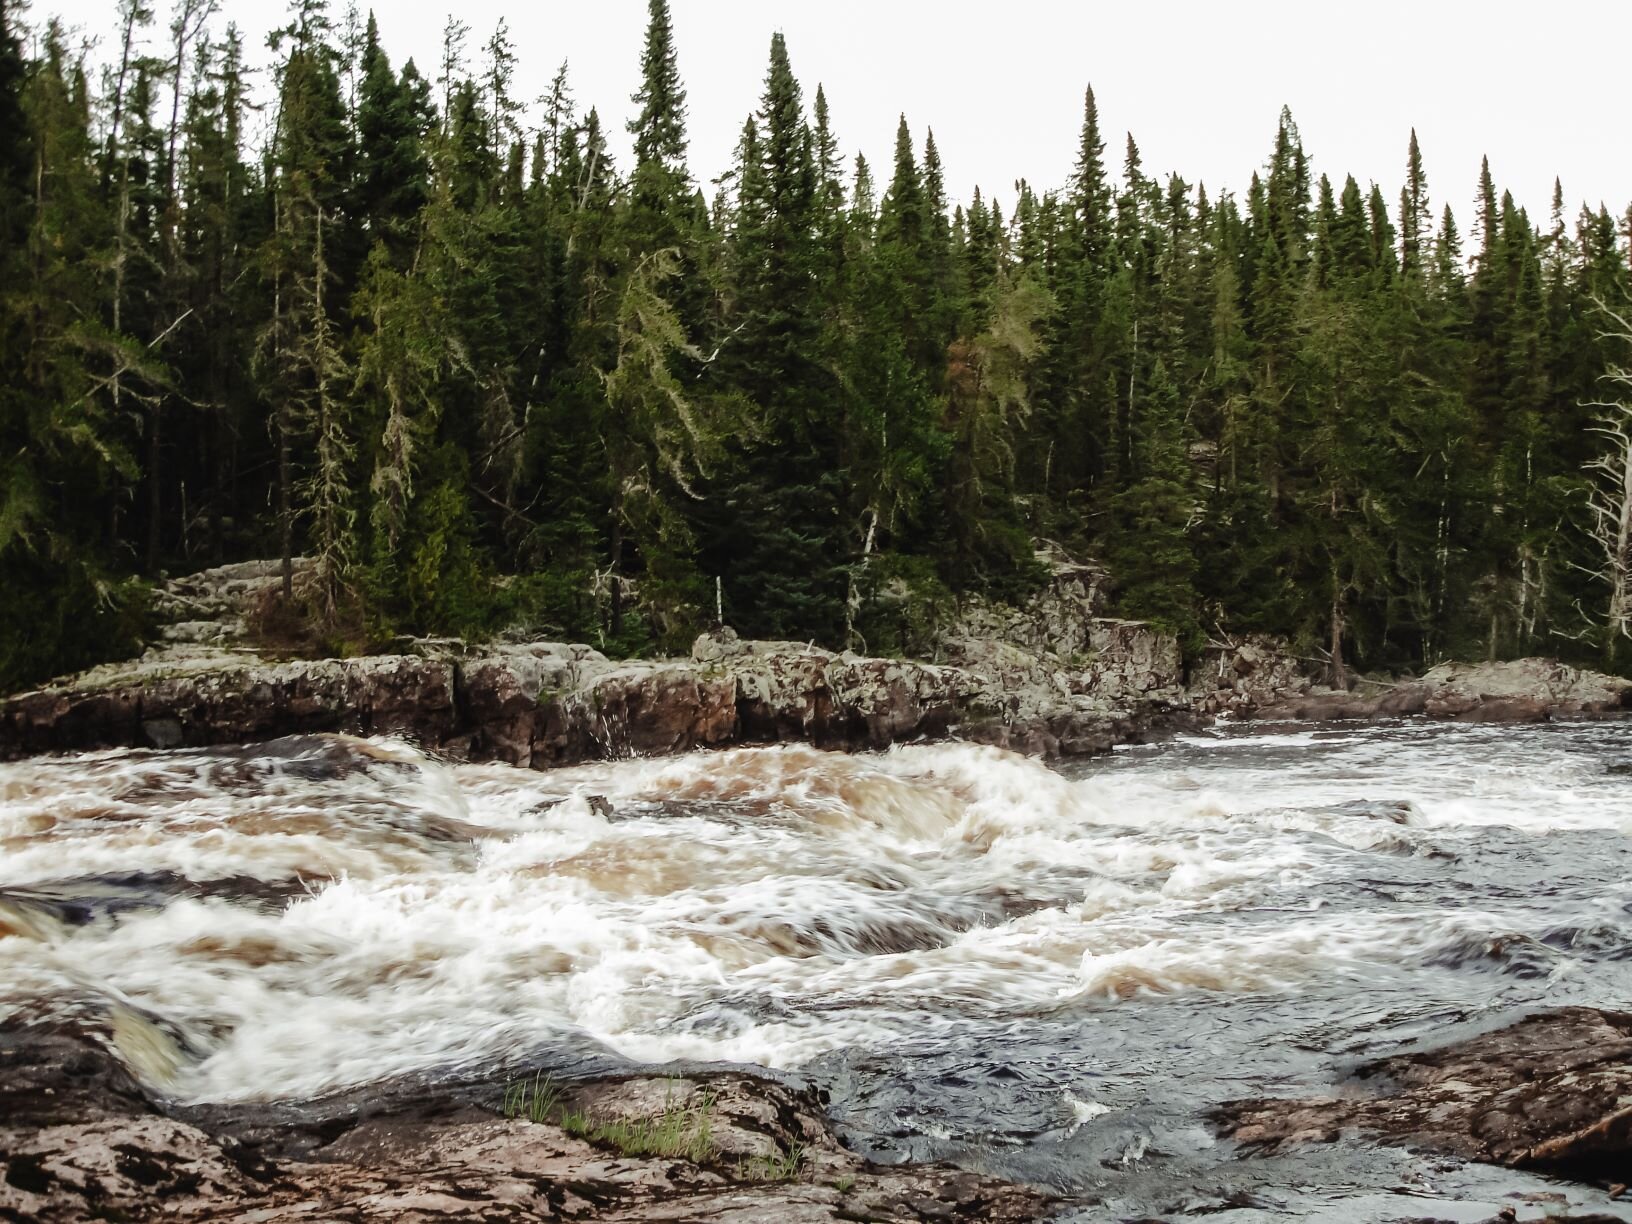 A photo of a rushing river. The shorelines on either side are made of rock, and the far shore is covered in evergreen trees.